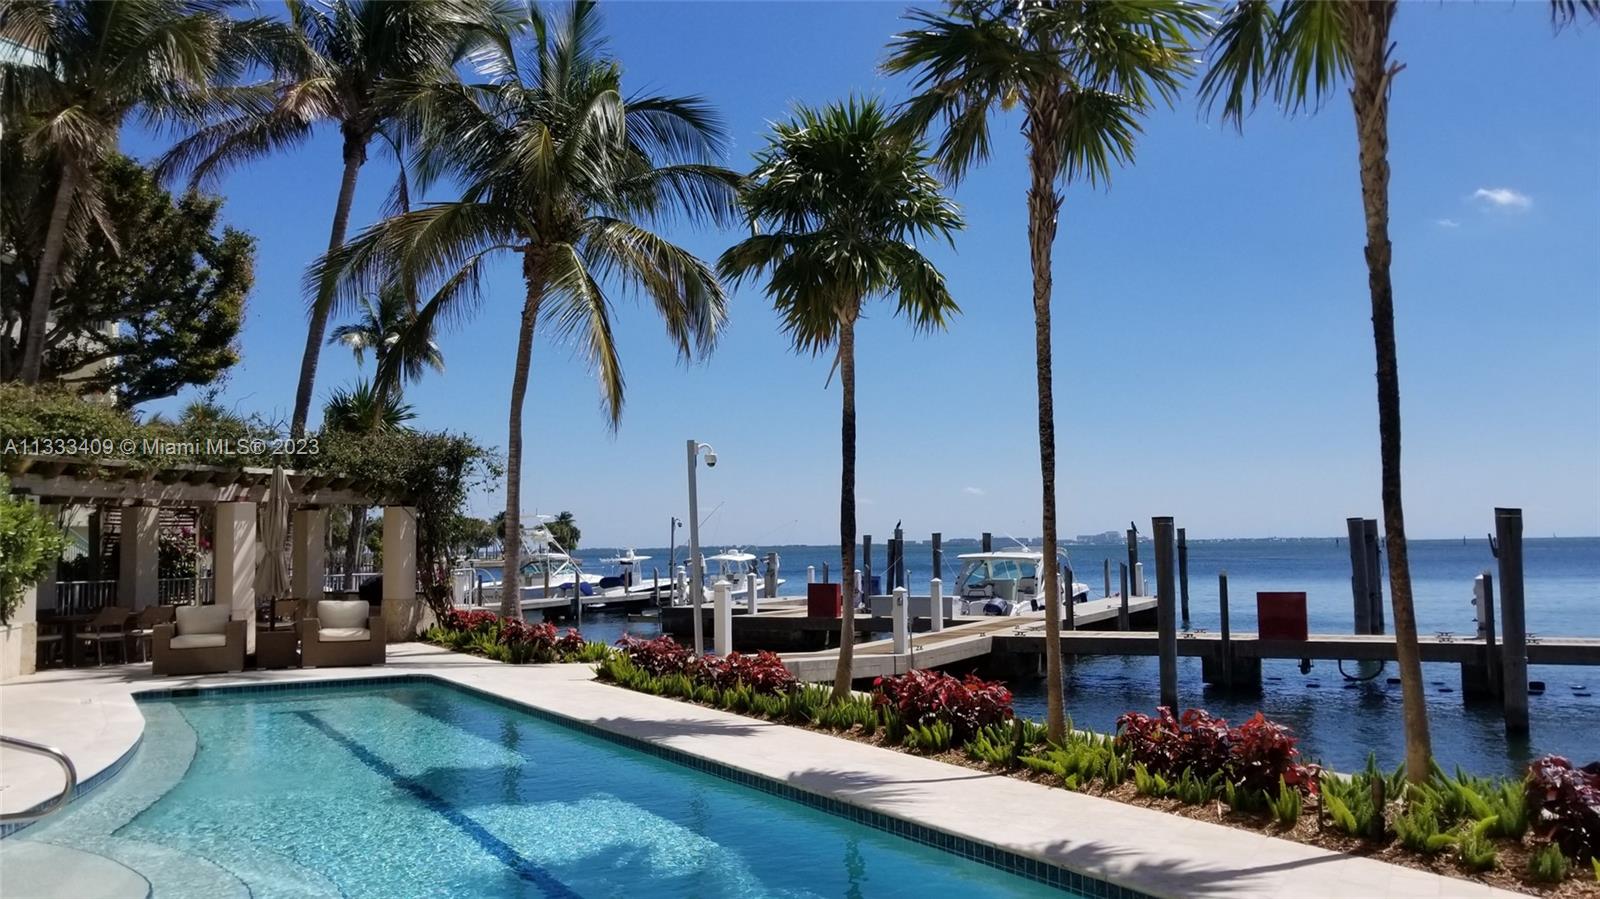 Private waterfront residence with only 10 units in the heart of Coconut Grove, right on Biscayne Bay with direct ocean access; deep-water Marina, dock 17 x 46 included and 3 parking spaces. This beautiful residence offers private foyer, high ceilings, impact windows, Poggenpohl kitchen, breakfast nook, 3 bedrooms-suite, 1 half bath, marble floors throughout, expansive terraces and beautiful views of Biscayne Bay. Amenities include 60 ft lap pool, Jacuzzi, exercise room and BBQ area. This boutique building offers tranquility and a wonderful lifestyle, renovated lobby, newer roof, and A/C.